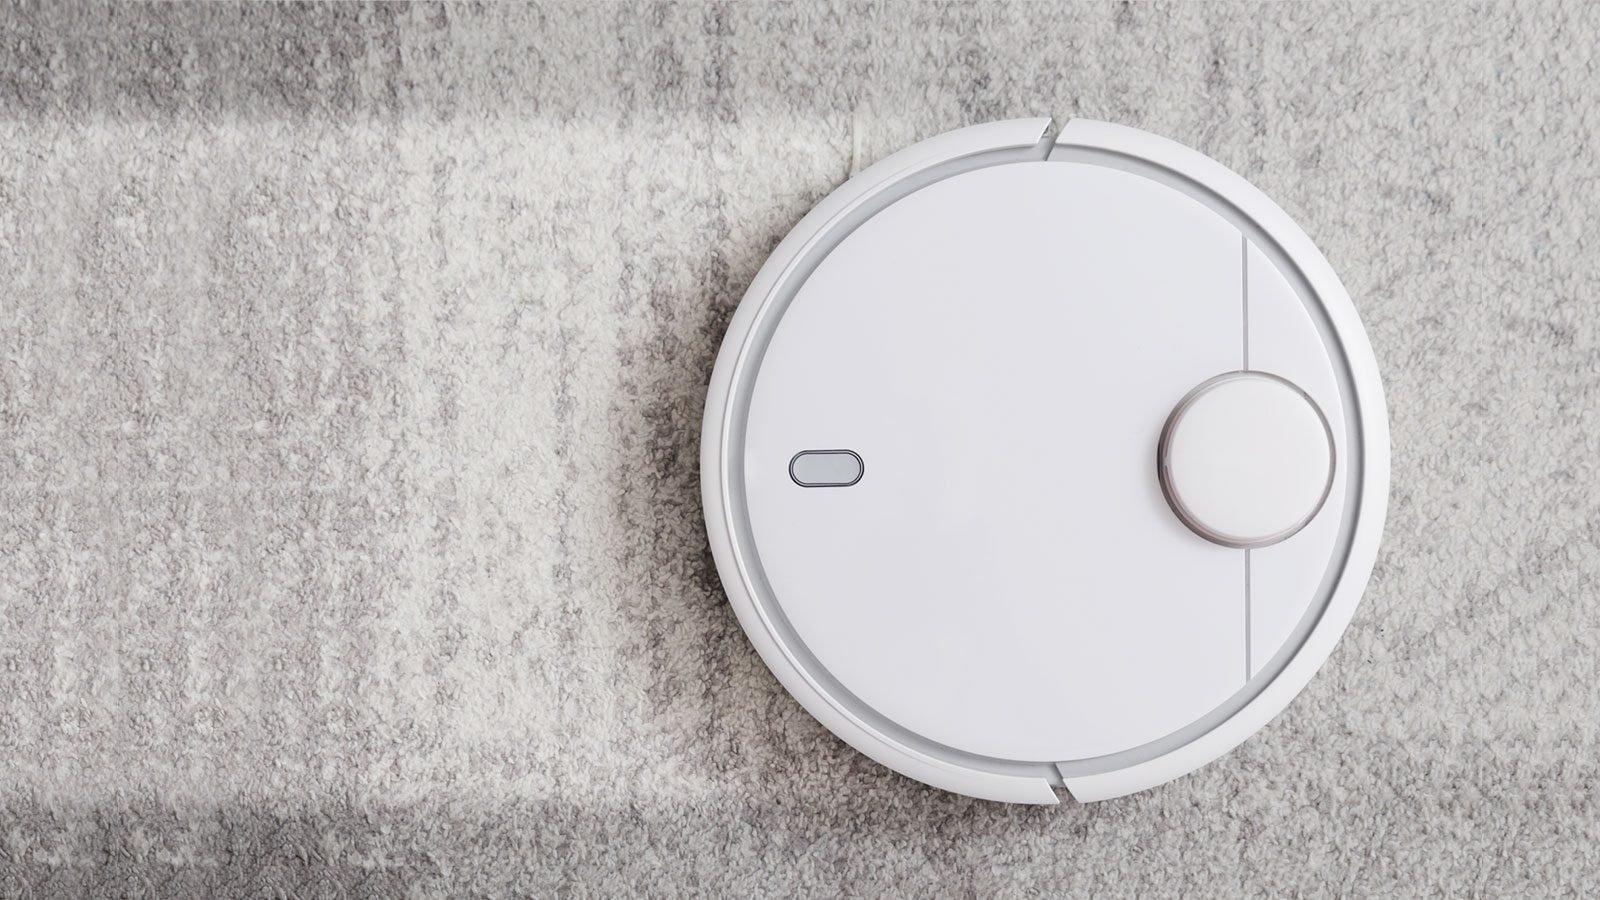 Are Robotic Vacuums Really Worth It?